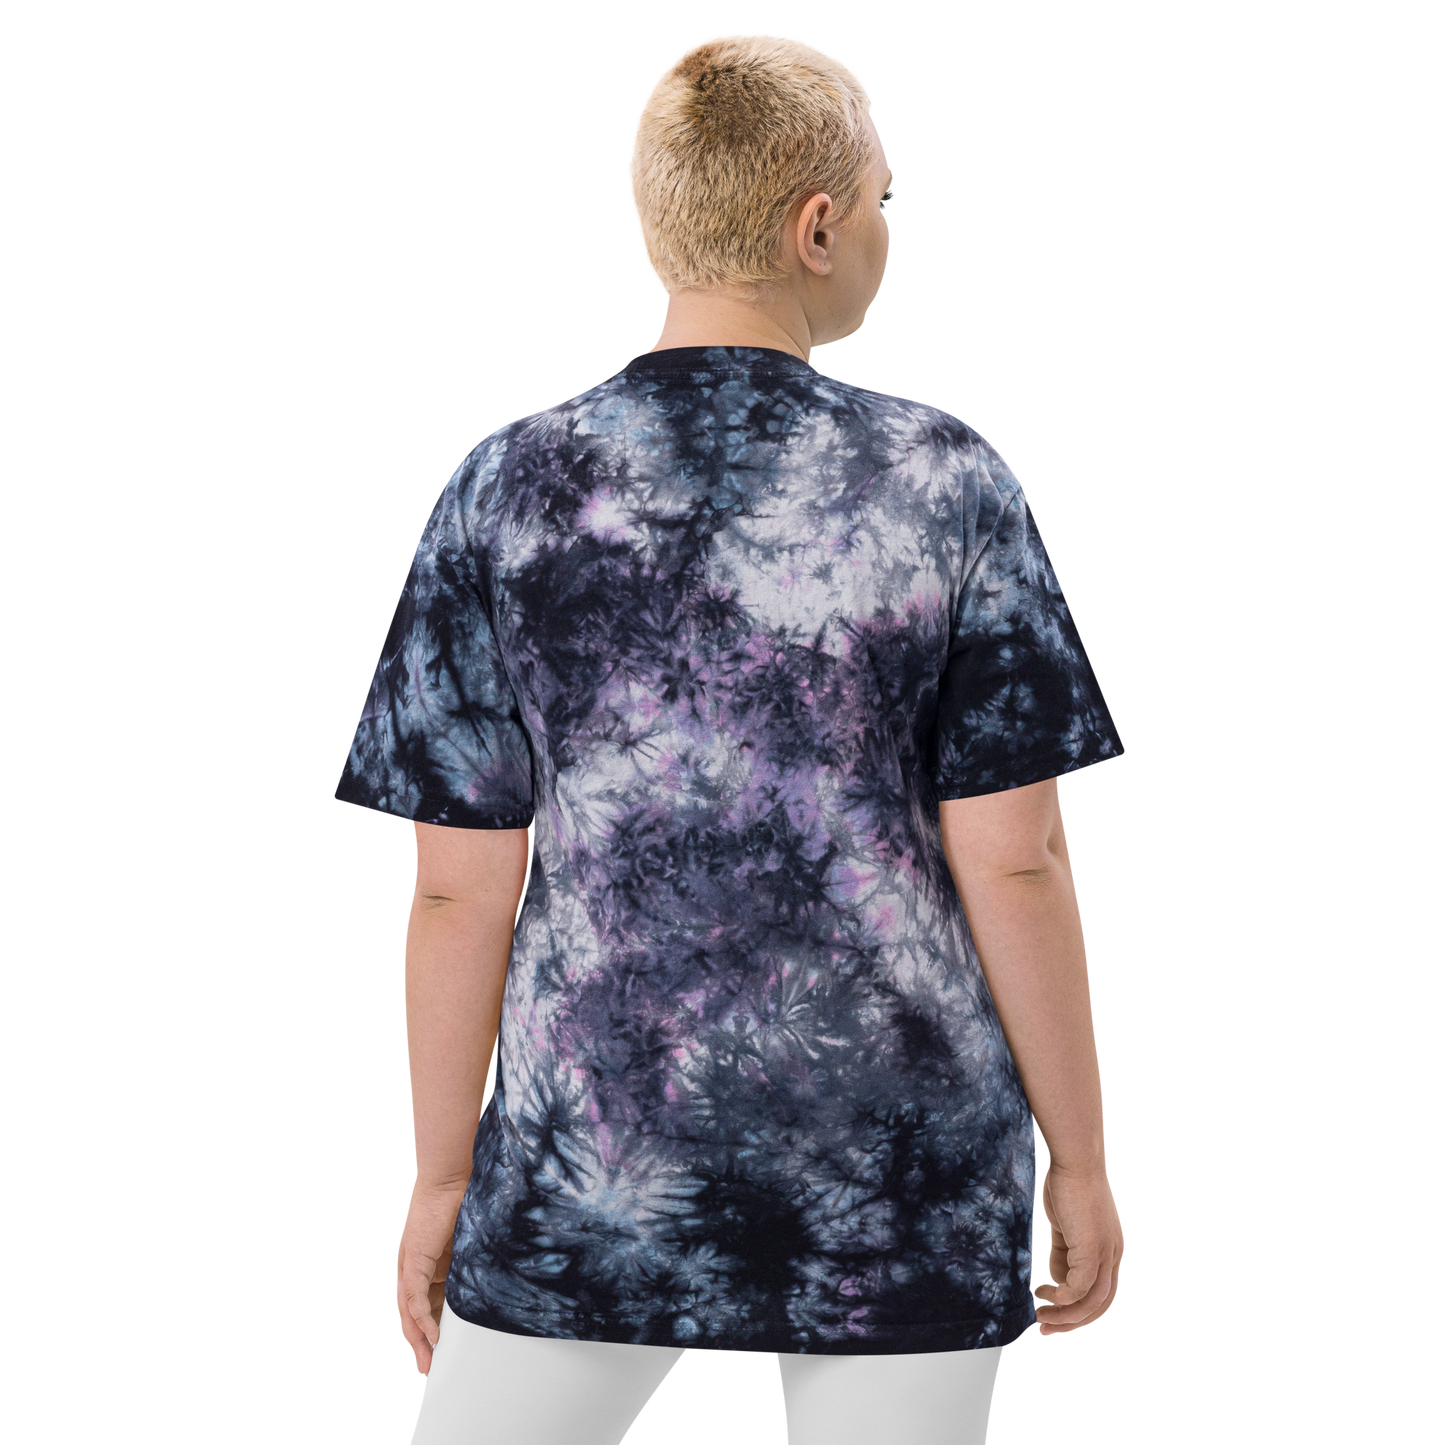 YHM Designs - YXY Whitehorse Oversized Tie-Dye T-Shirt - Crossed-X Design with Airport Code and Vintage Propliner - White Embroidery - Image 06